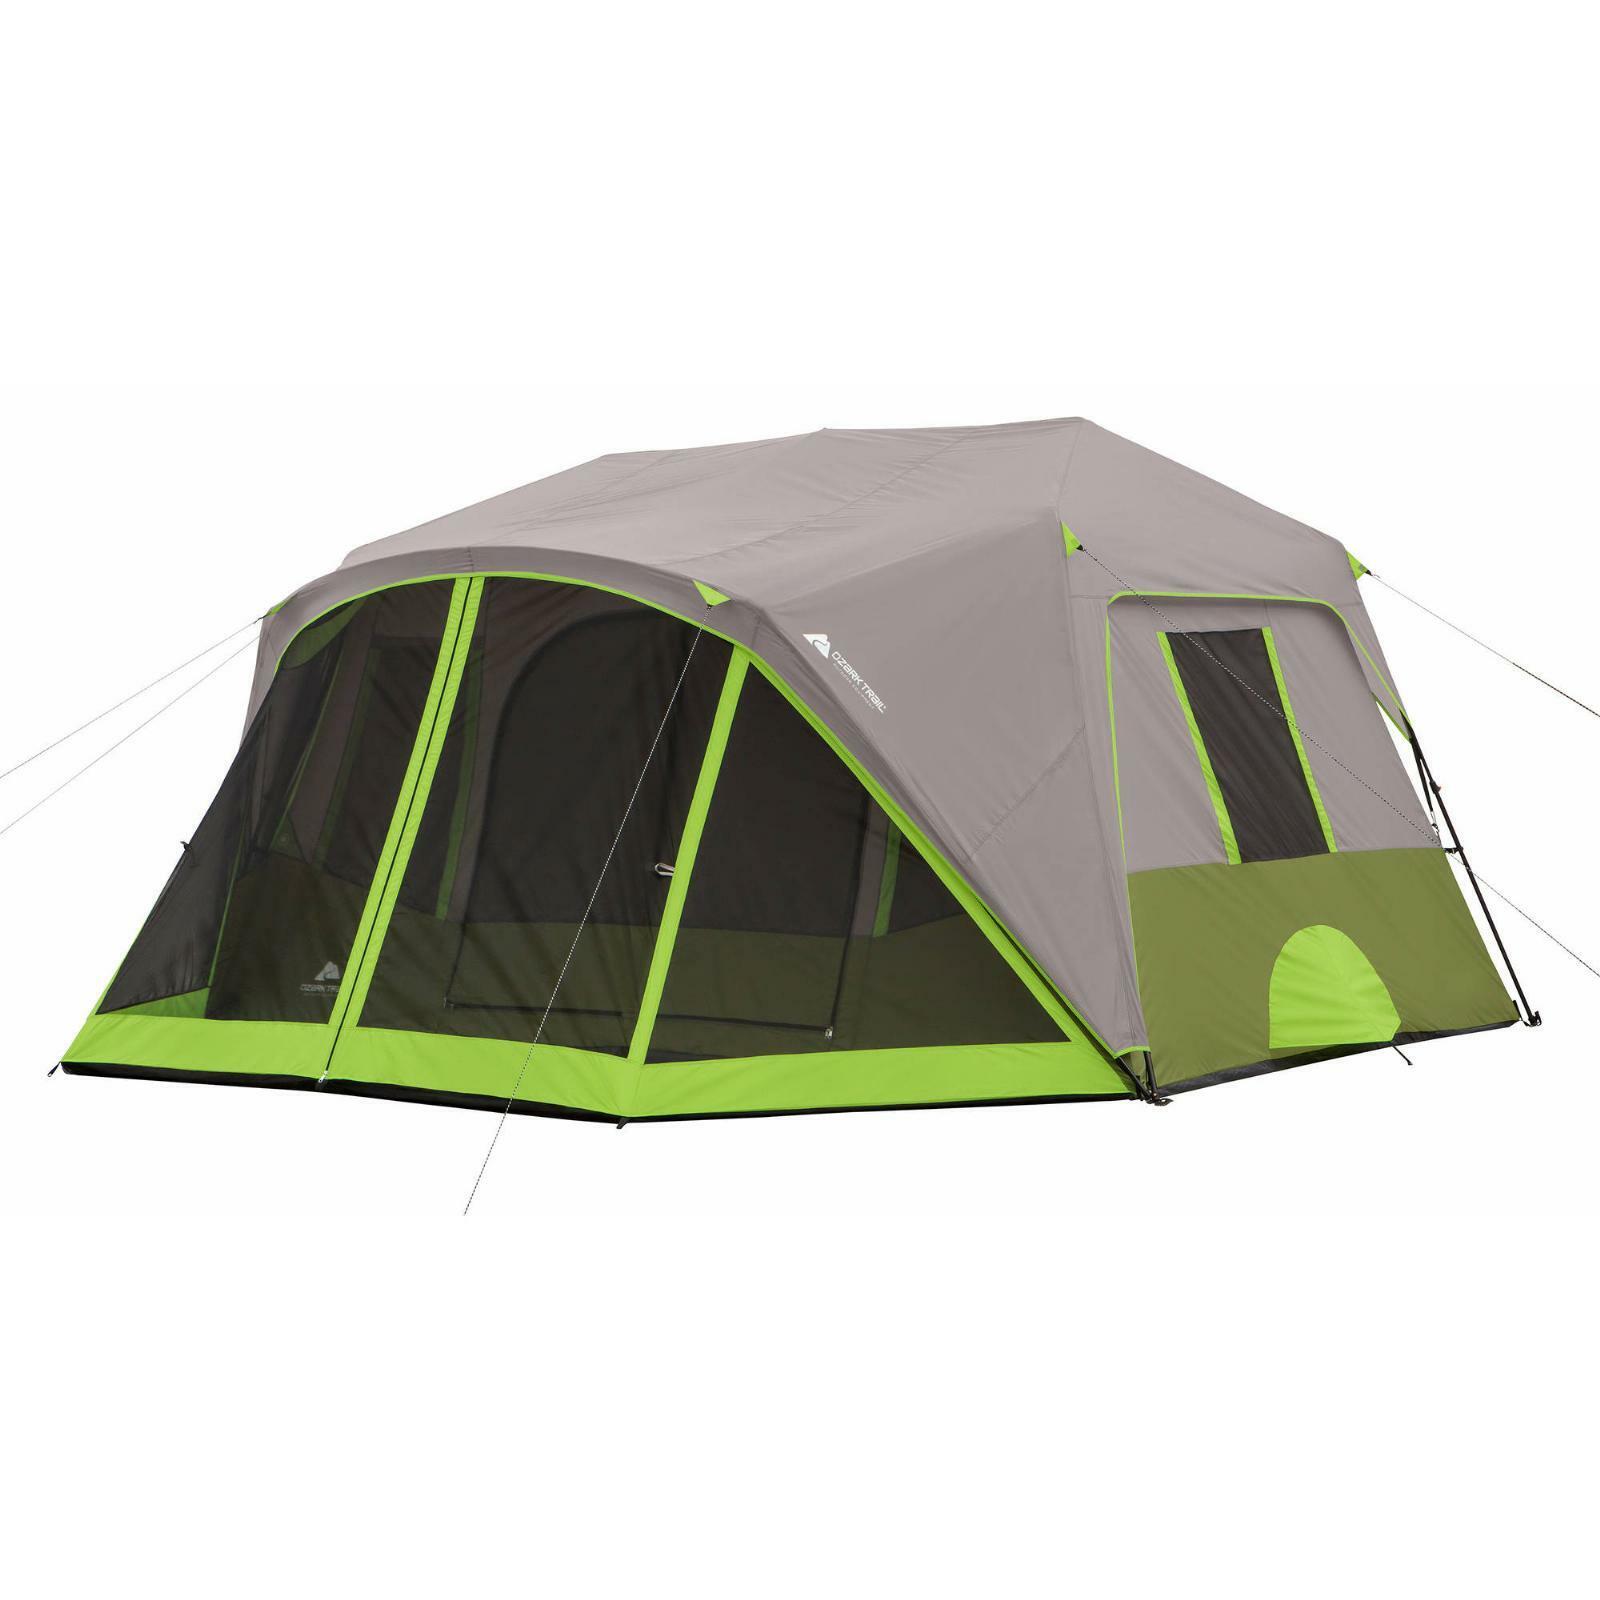 2 Room Instant Family Cabin Camping Tent With Screen Room 7ft Ceiling Sleeps 9